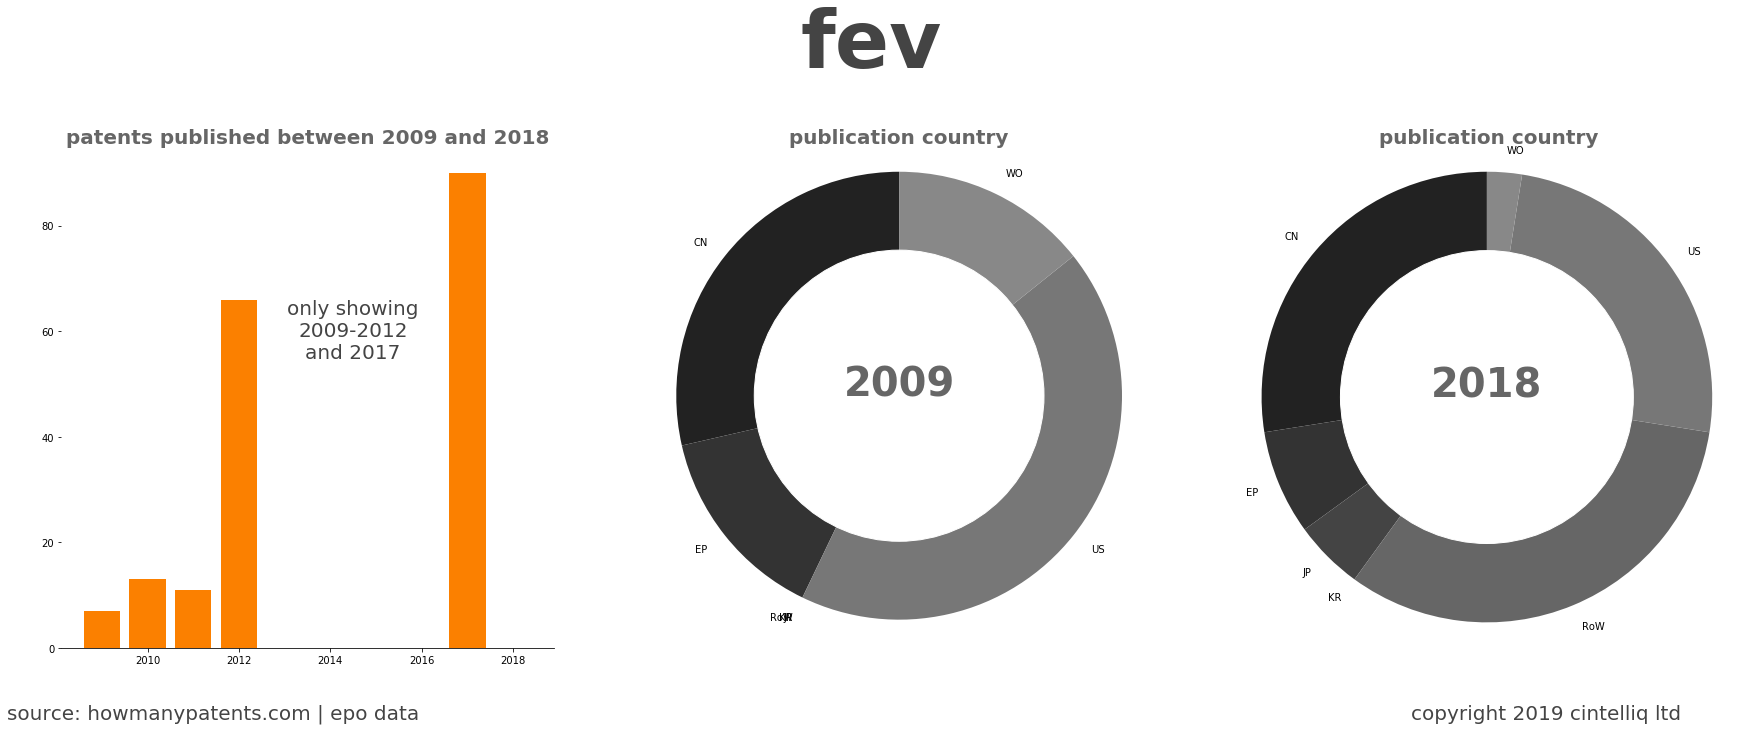 summary of patents for Fev